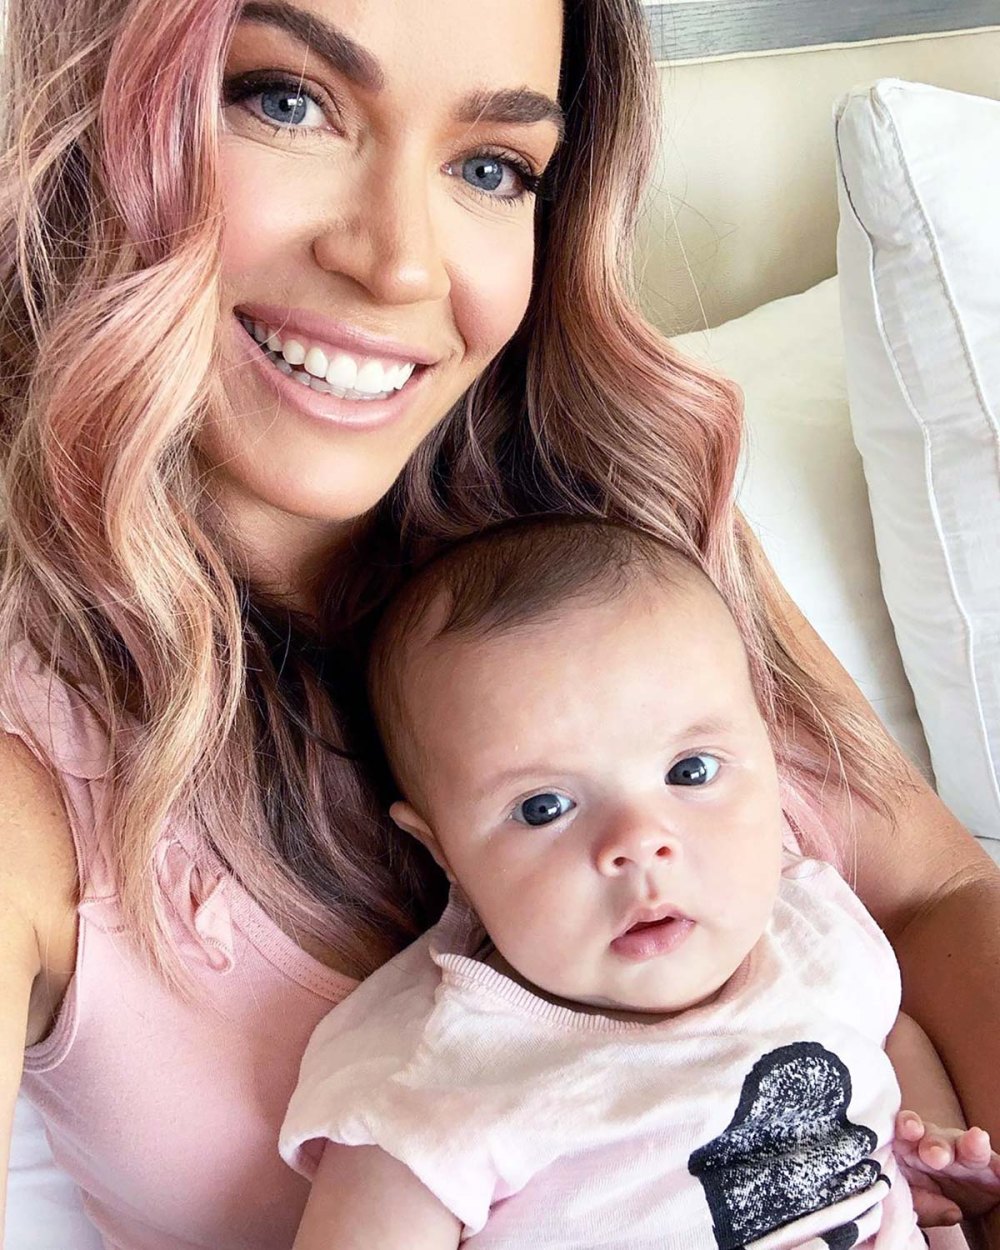 Teddi Mellencamp ‘Cried for Days’ When She Couldn’t Breast-Feed Daughter Dove: 'So Emotional'